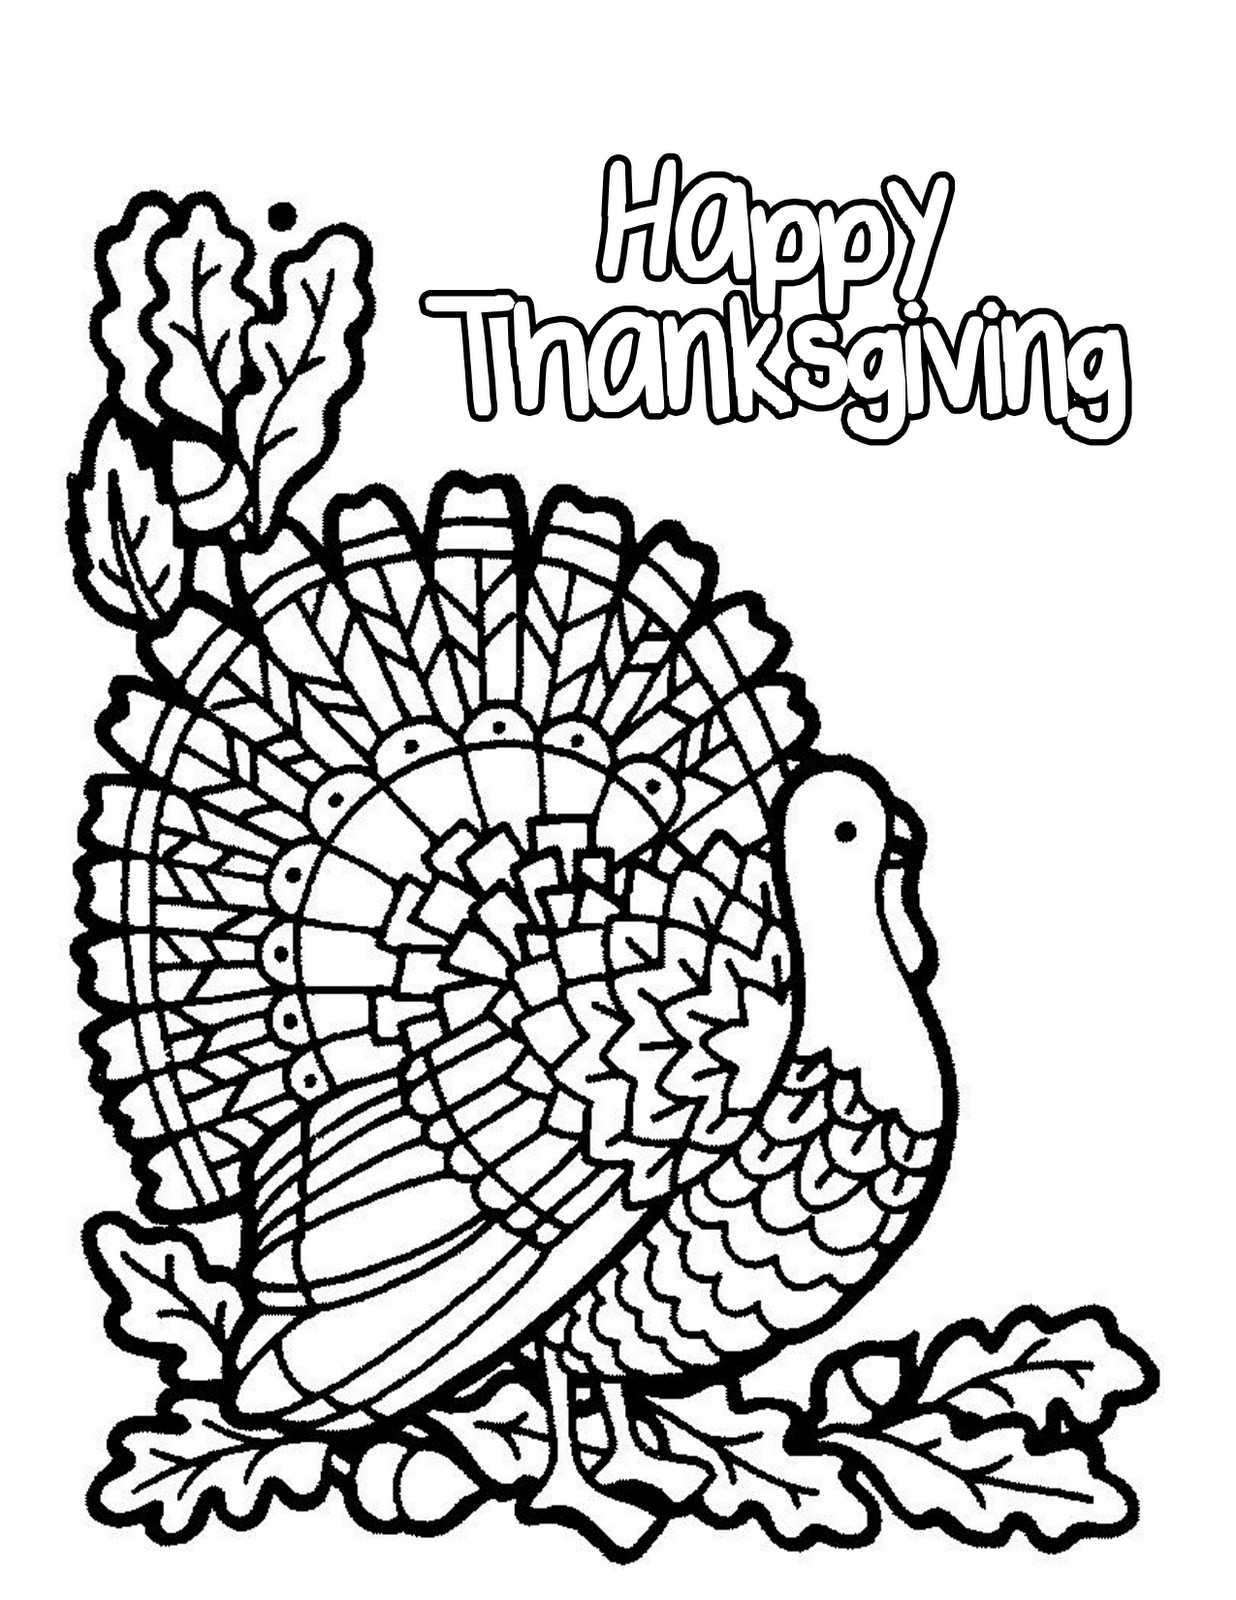 Printable Thanksgiving Coloring Pages ColoringMe com